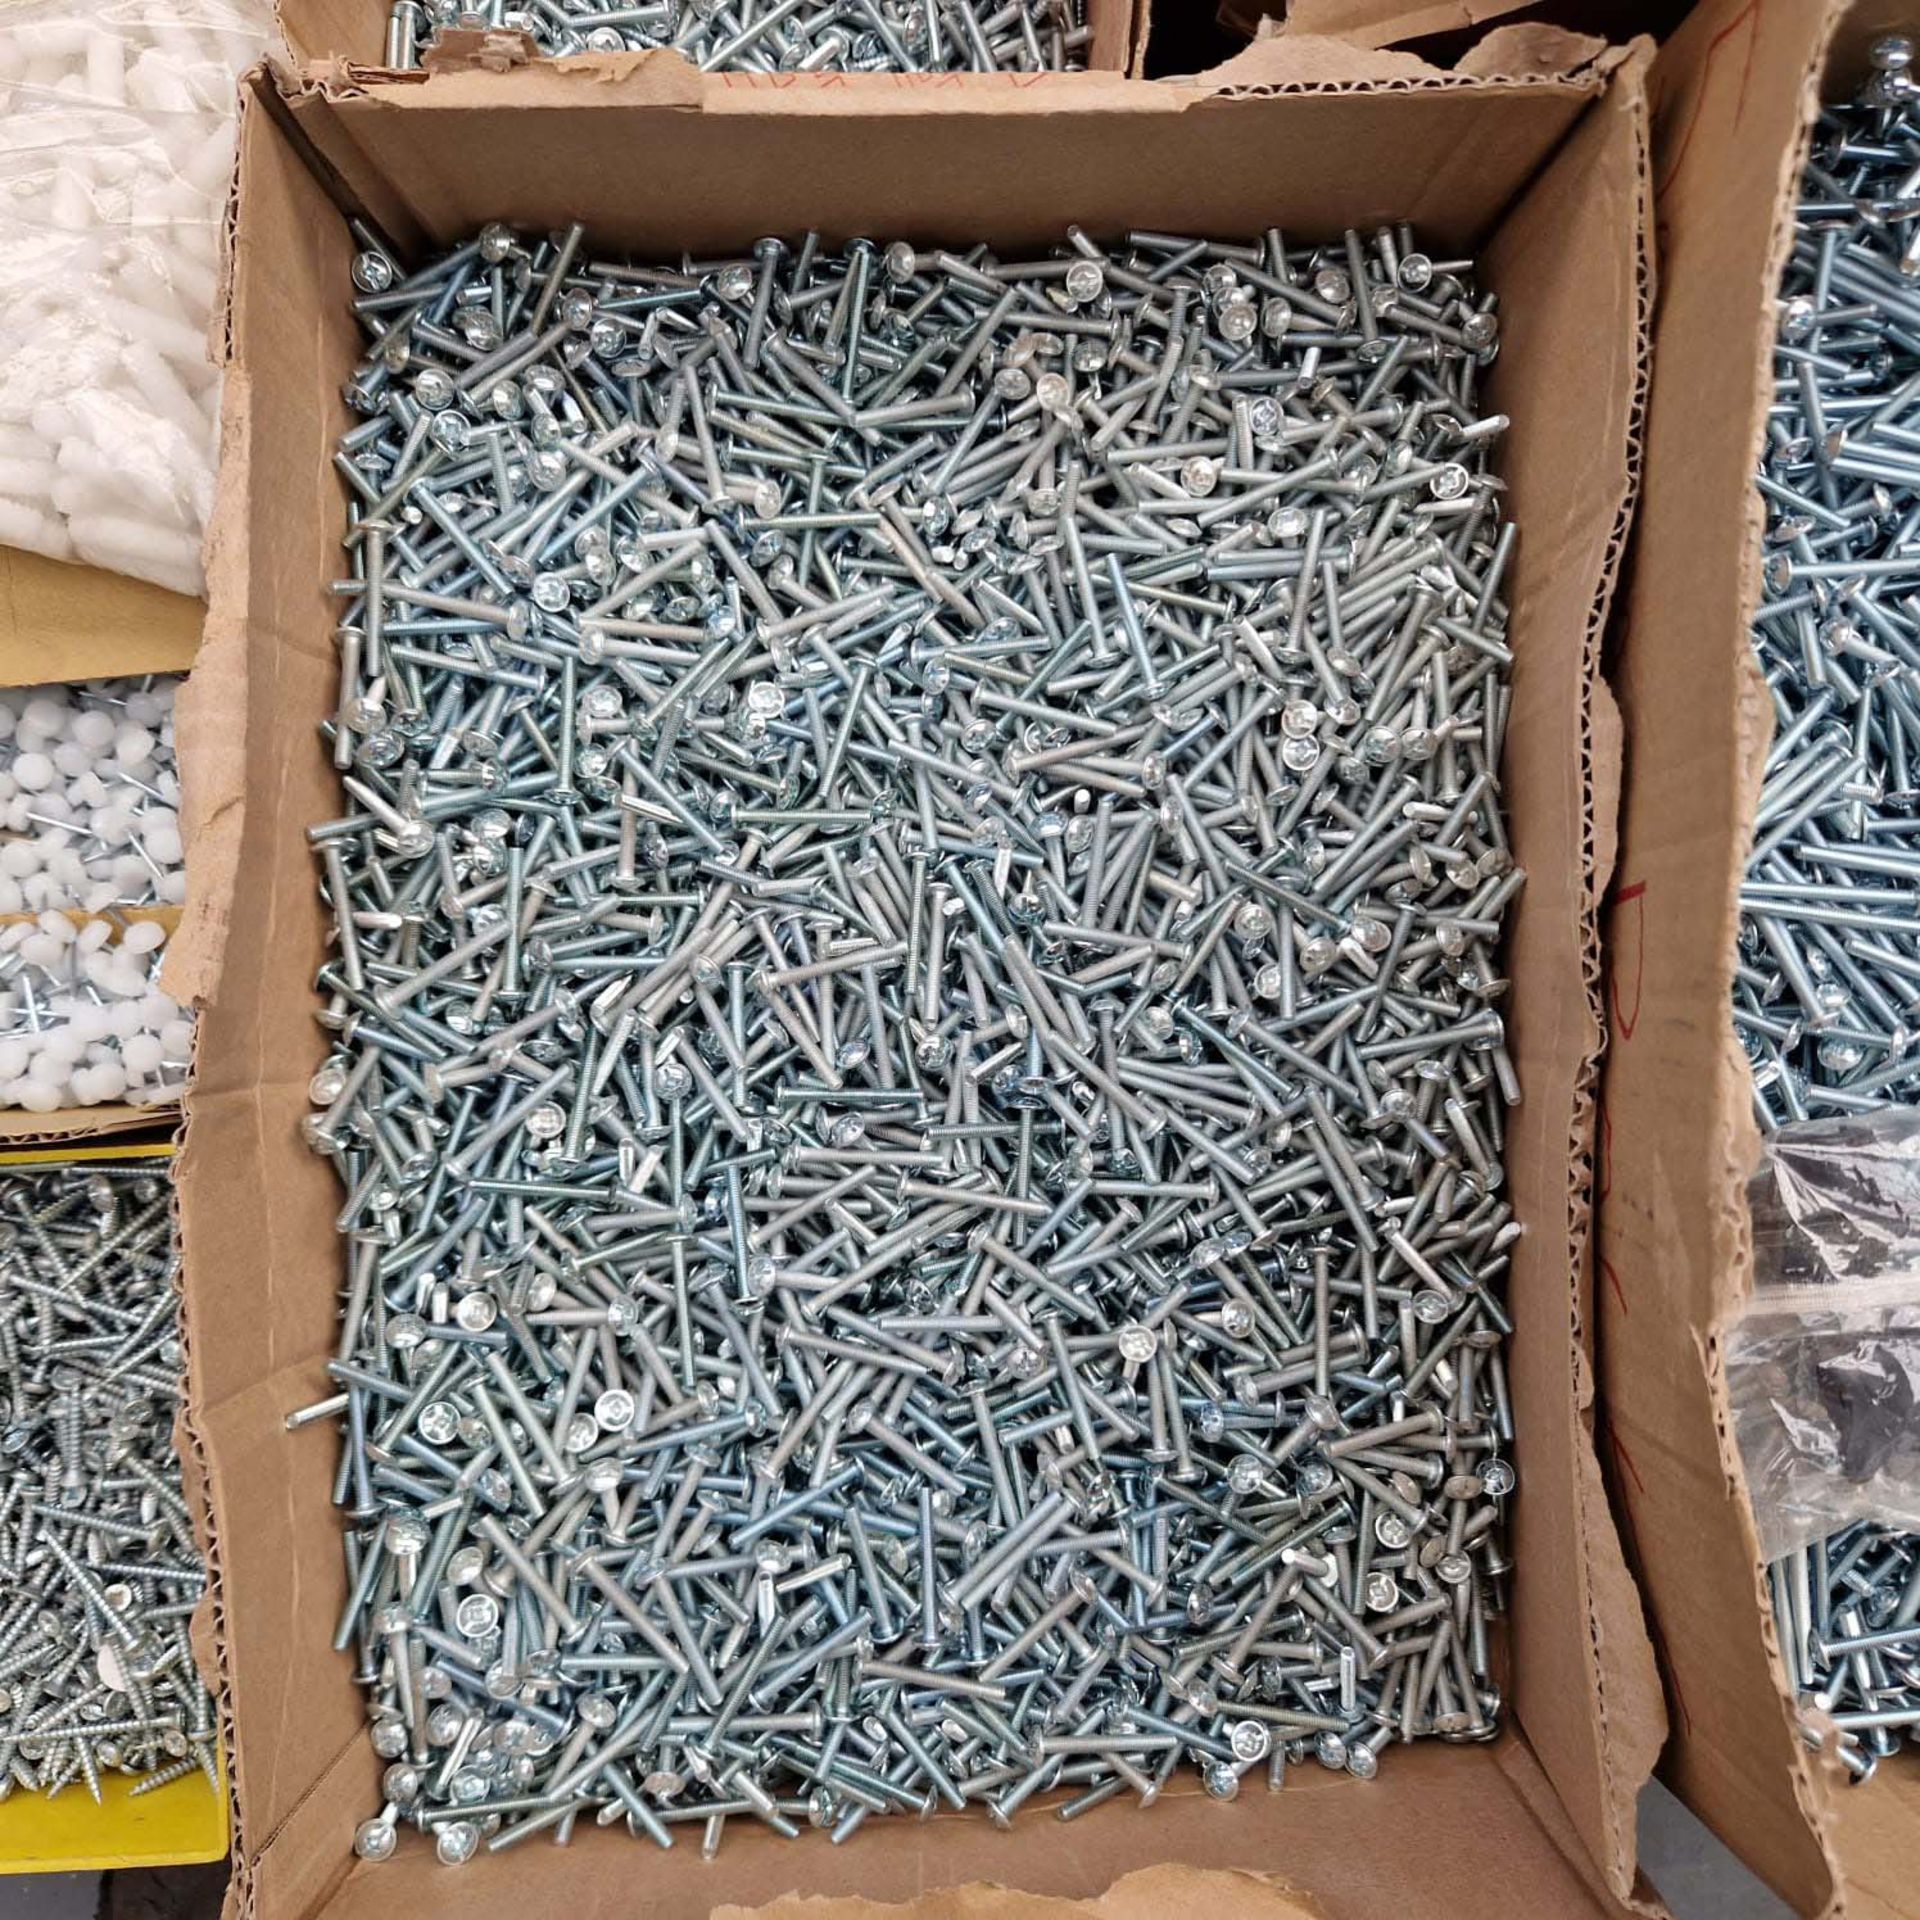 Quantity of Various Screws, Dowels & Hinges Etc. For Woodworking. - Image 15 of 24